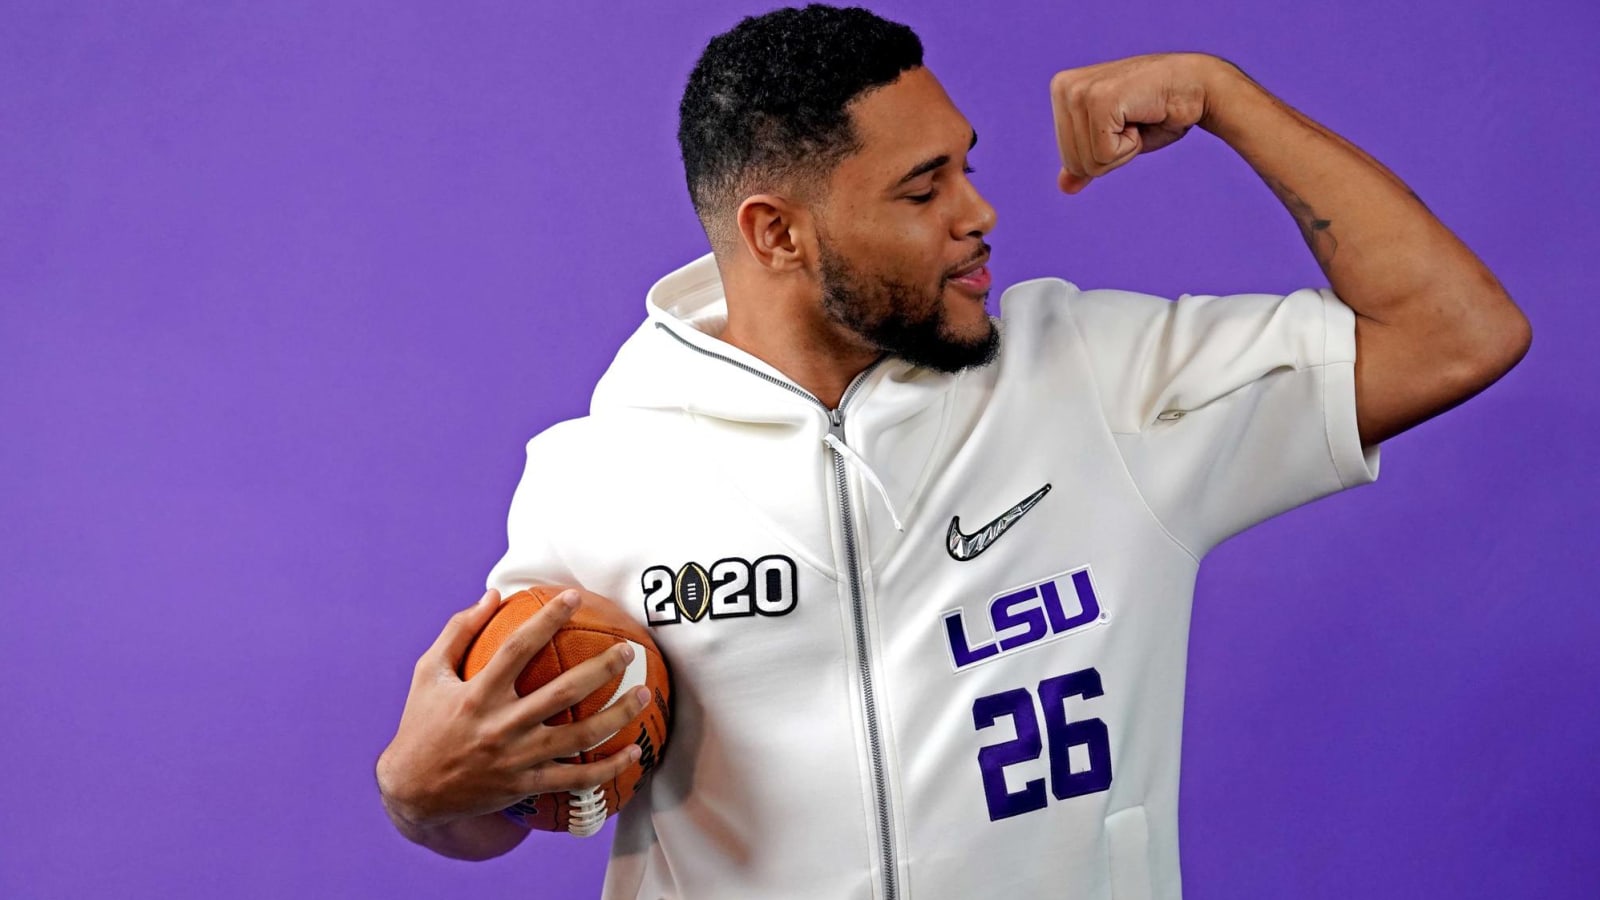 LSU releases awesome hype video narrated by The Rock